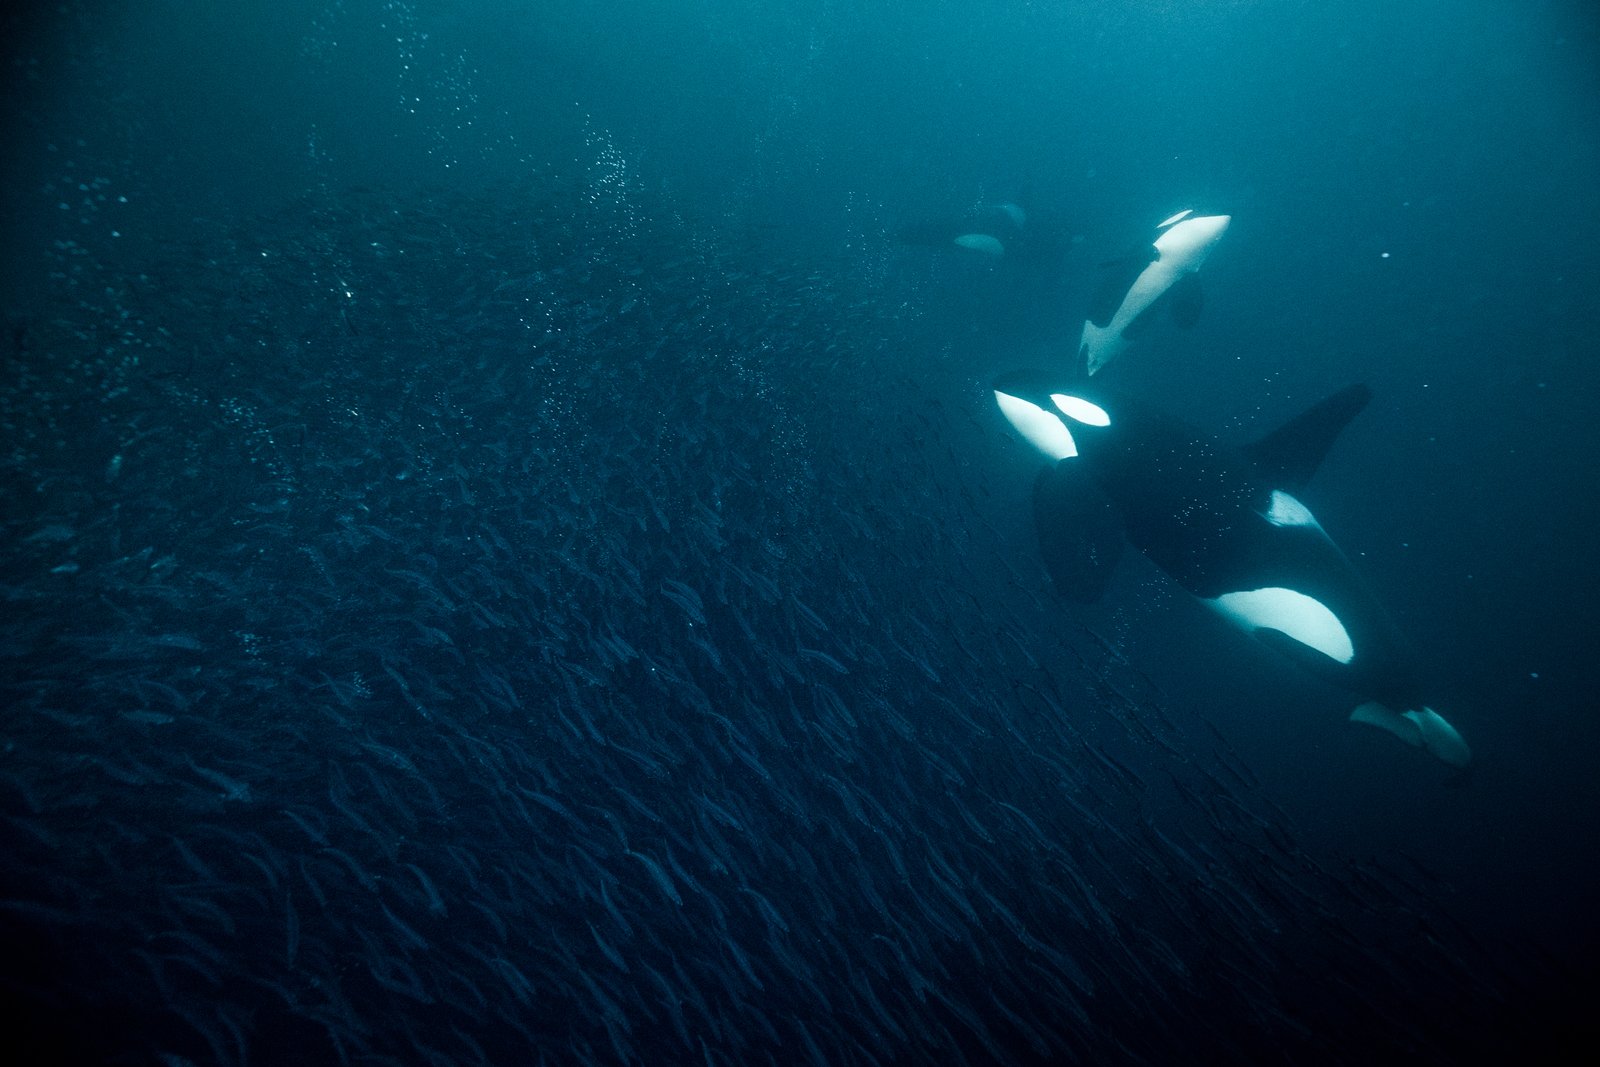 underwater orca expedition baitball herring fish hunt killerwhales